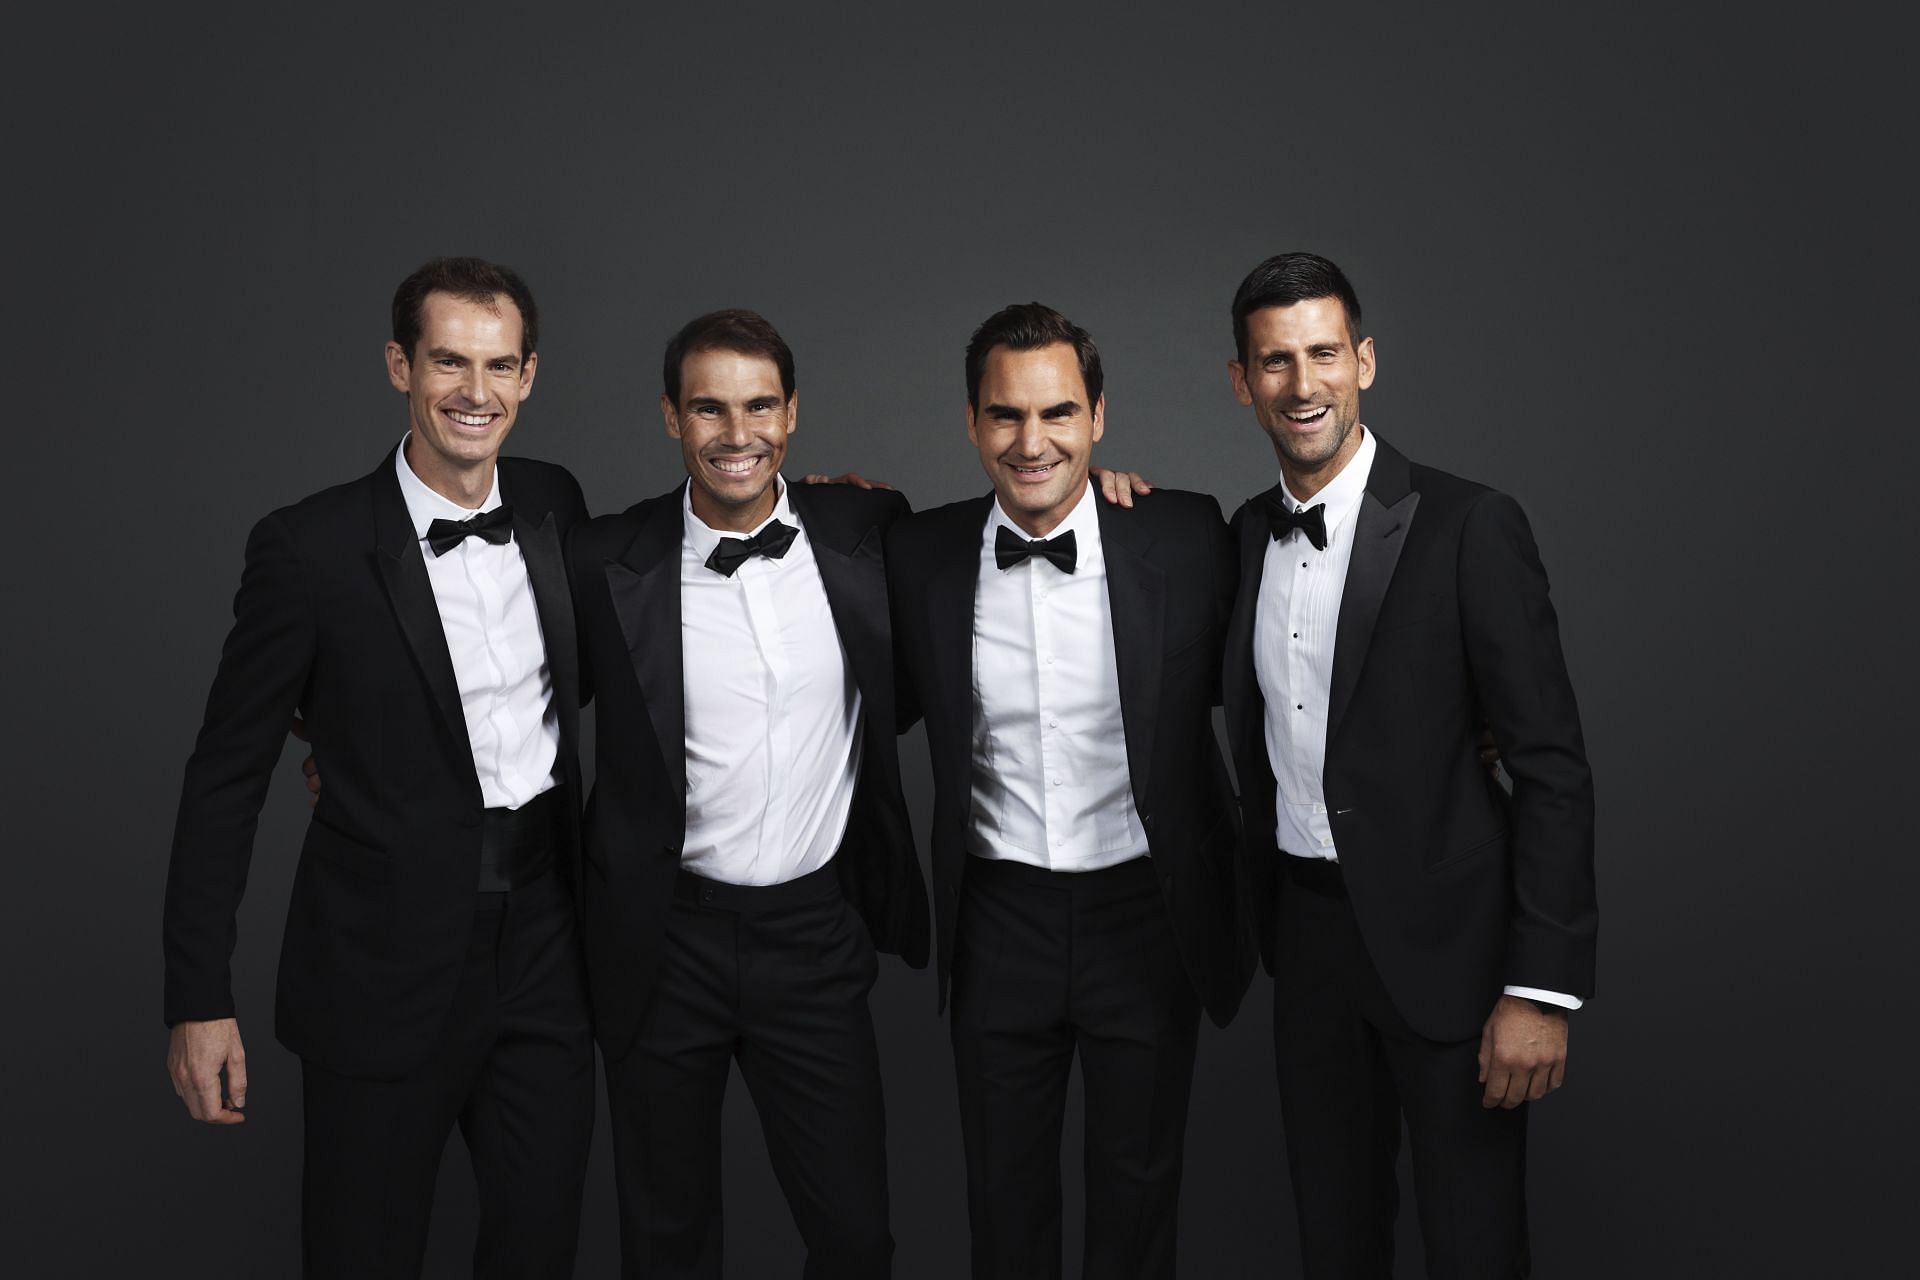 (L-R): Andy Murray, Rafael Nadal, Roger Federer, and Novak Djokovic ahead of the Laver Cup 2022